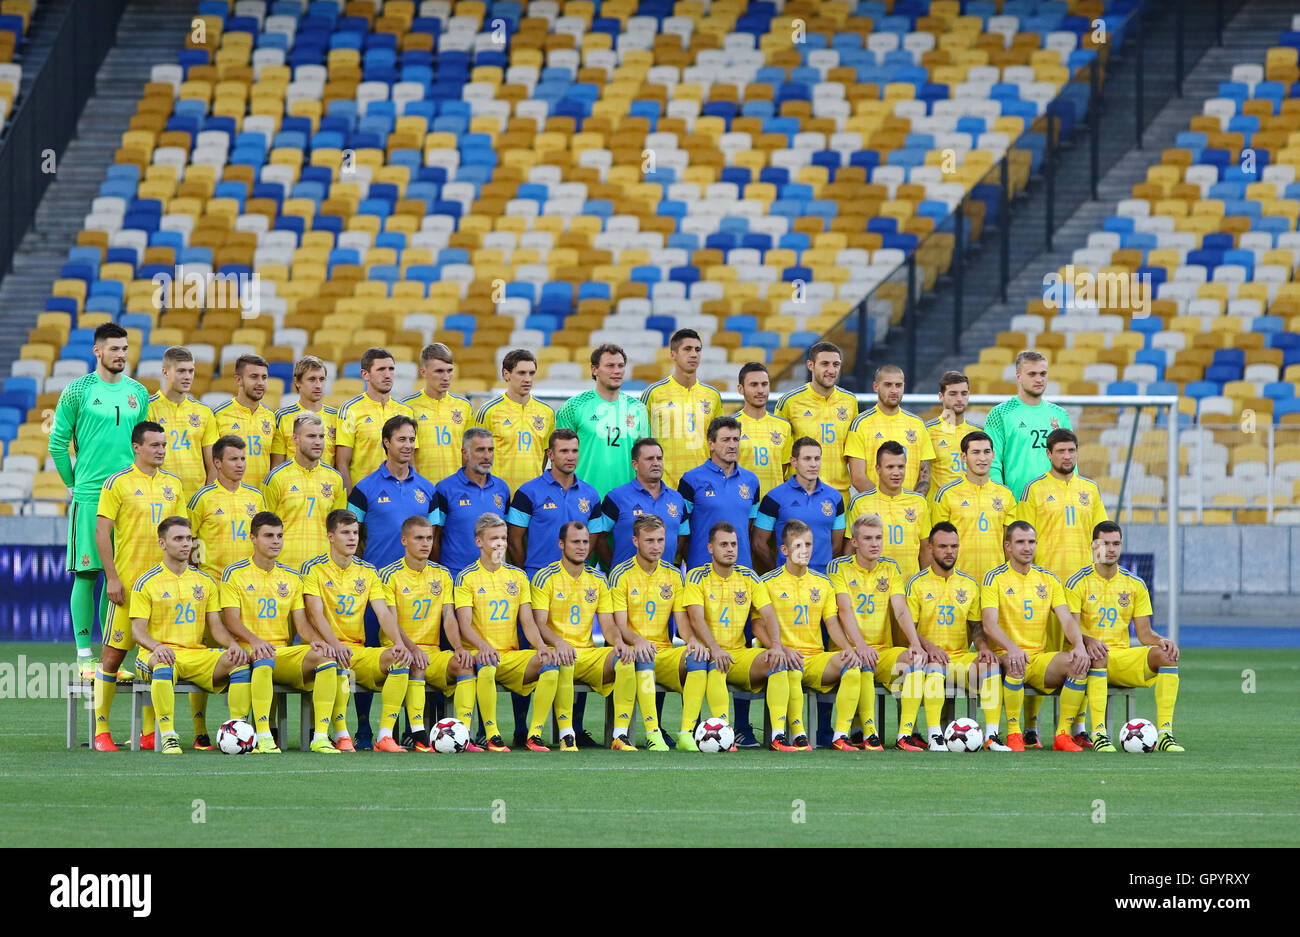 KYIV, UKRAINE - AUGUST 29, 2016: Group portrait of players and coaches of Ukraine National Football Team before FIFA World Cup 2018 Qualifying matches at NSC Olympic stadium in Kyiv, Ukraine Stock Photo